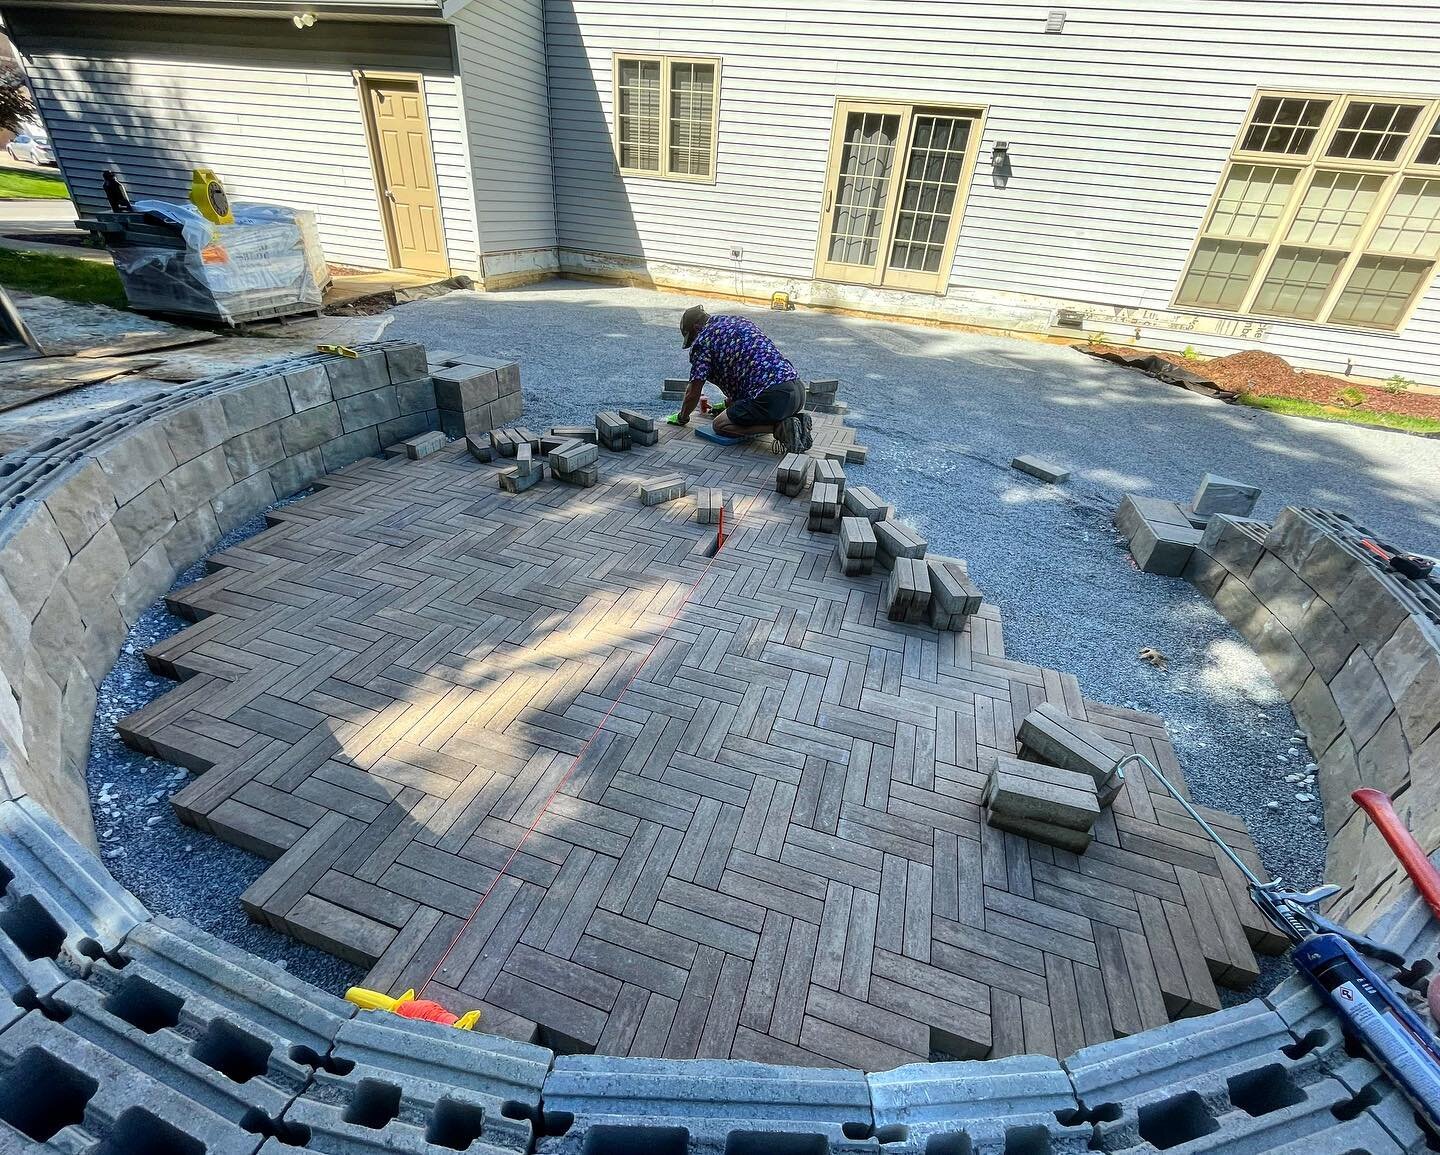 It&rsquo;s Paver Day AND Flamingo Friday!! Since Flannel Friday only lasts a few months we had to start a new tradition! 

Here we&rsquo;re laying another double herringbone in the Westmount paver by @techobloc. We&rsquo;ll also mix in some Blu60, Vi